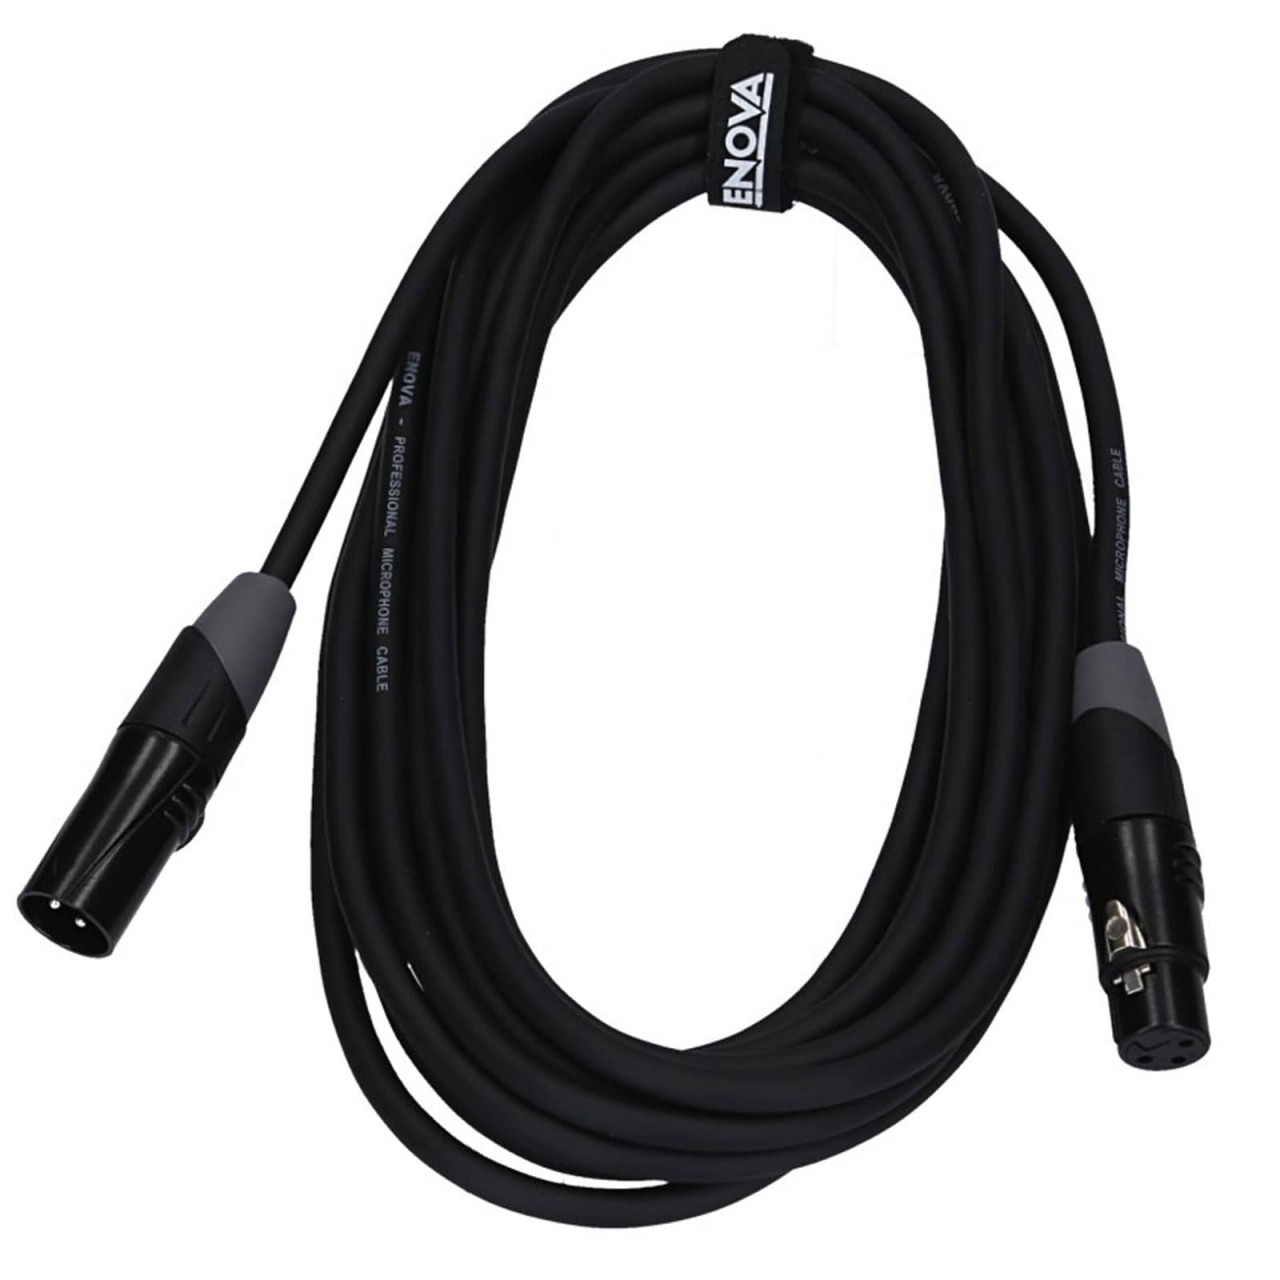 5m XLR cable, Microphone cable for professional balanced audio transmission